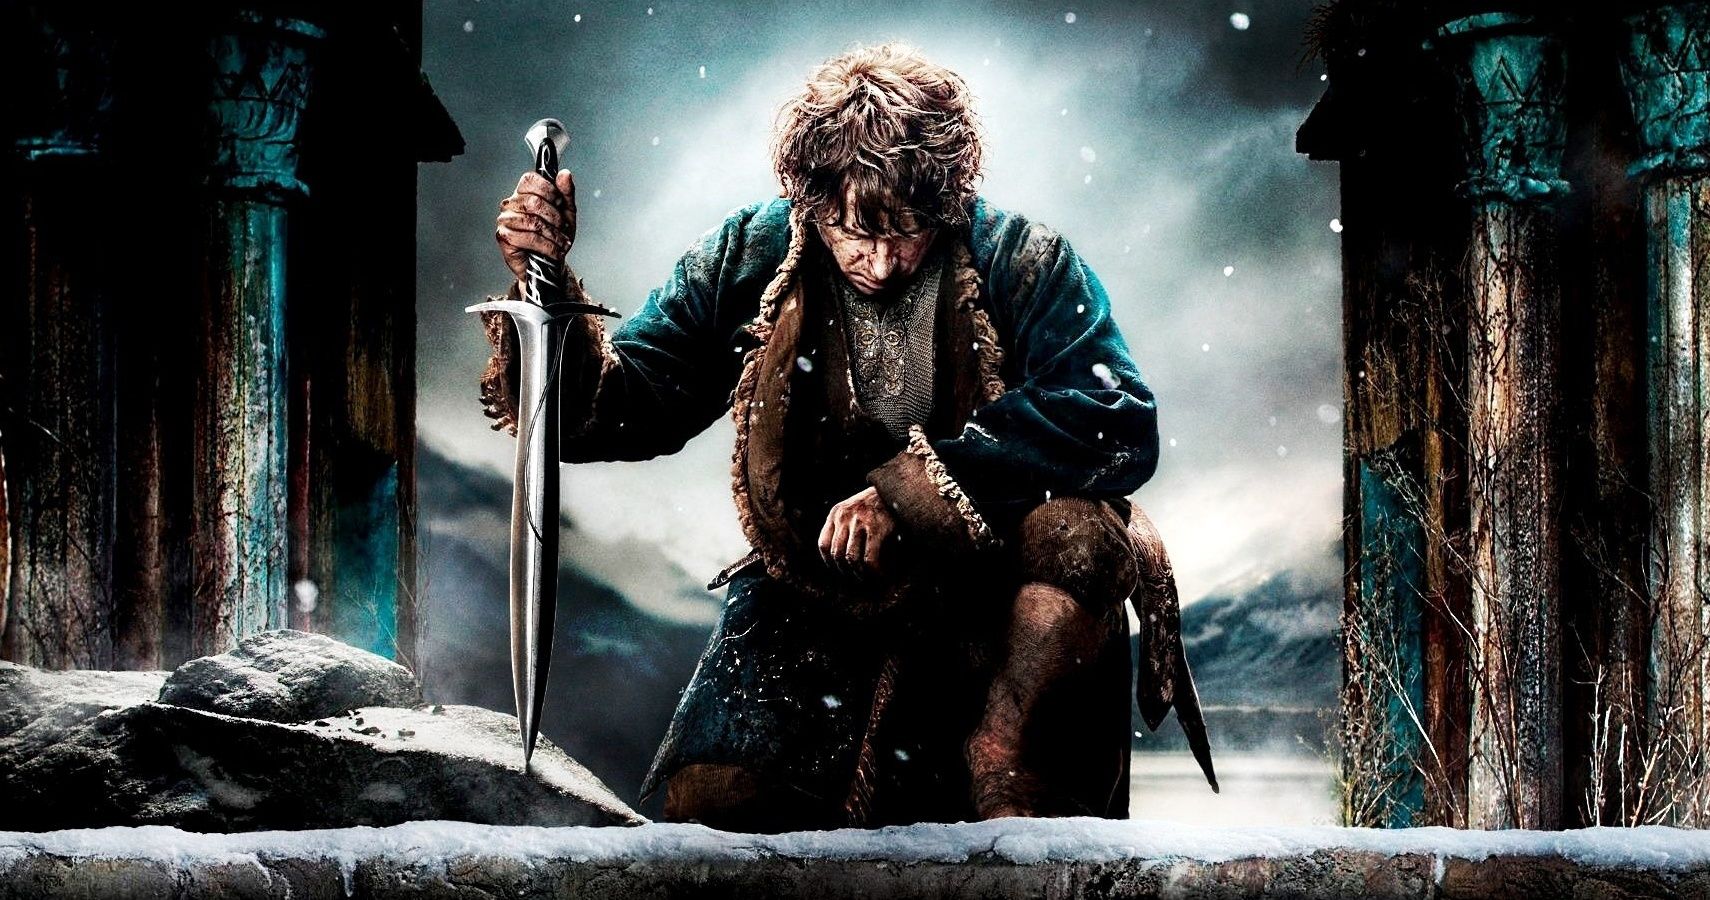 The Hobbit: The 10 Best Bilbo Baggins Quotes, Ranked